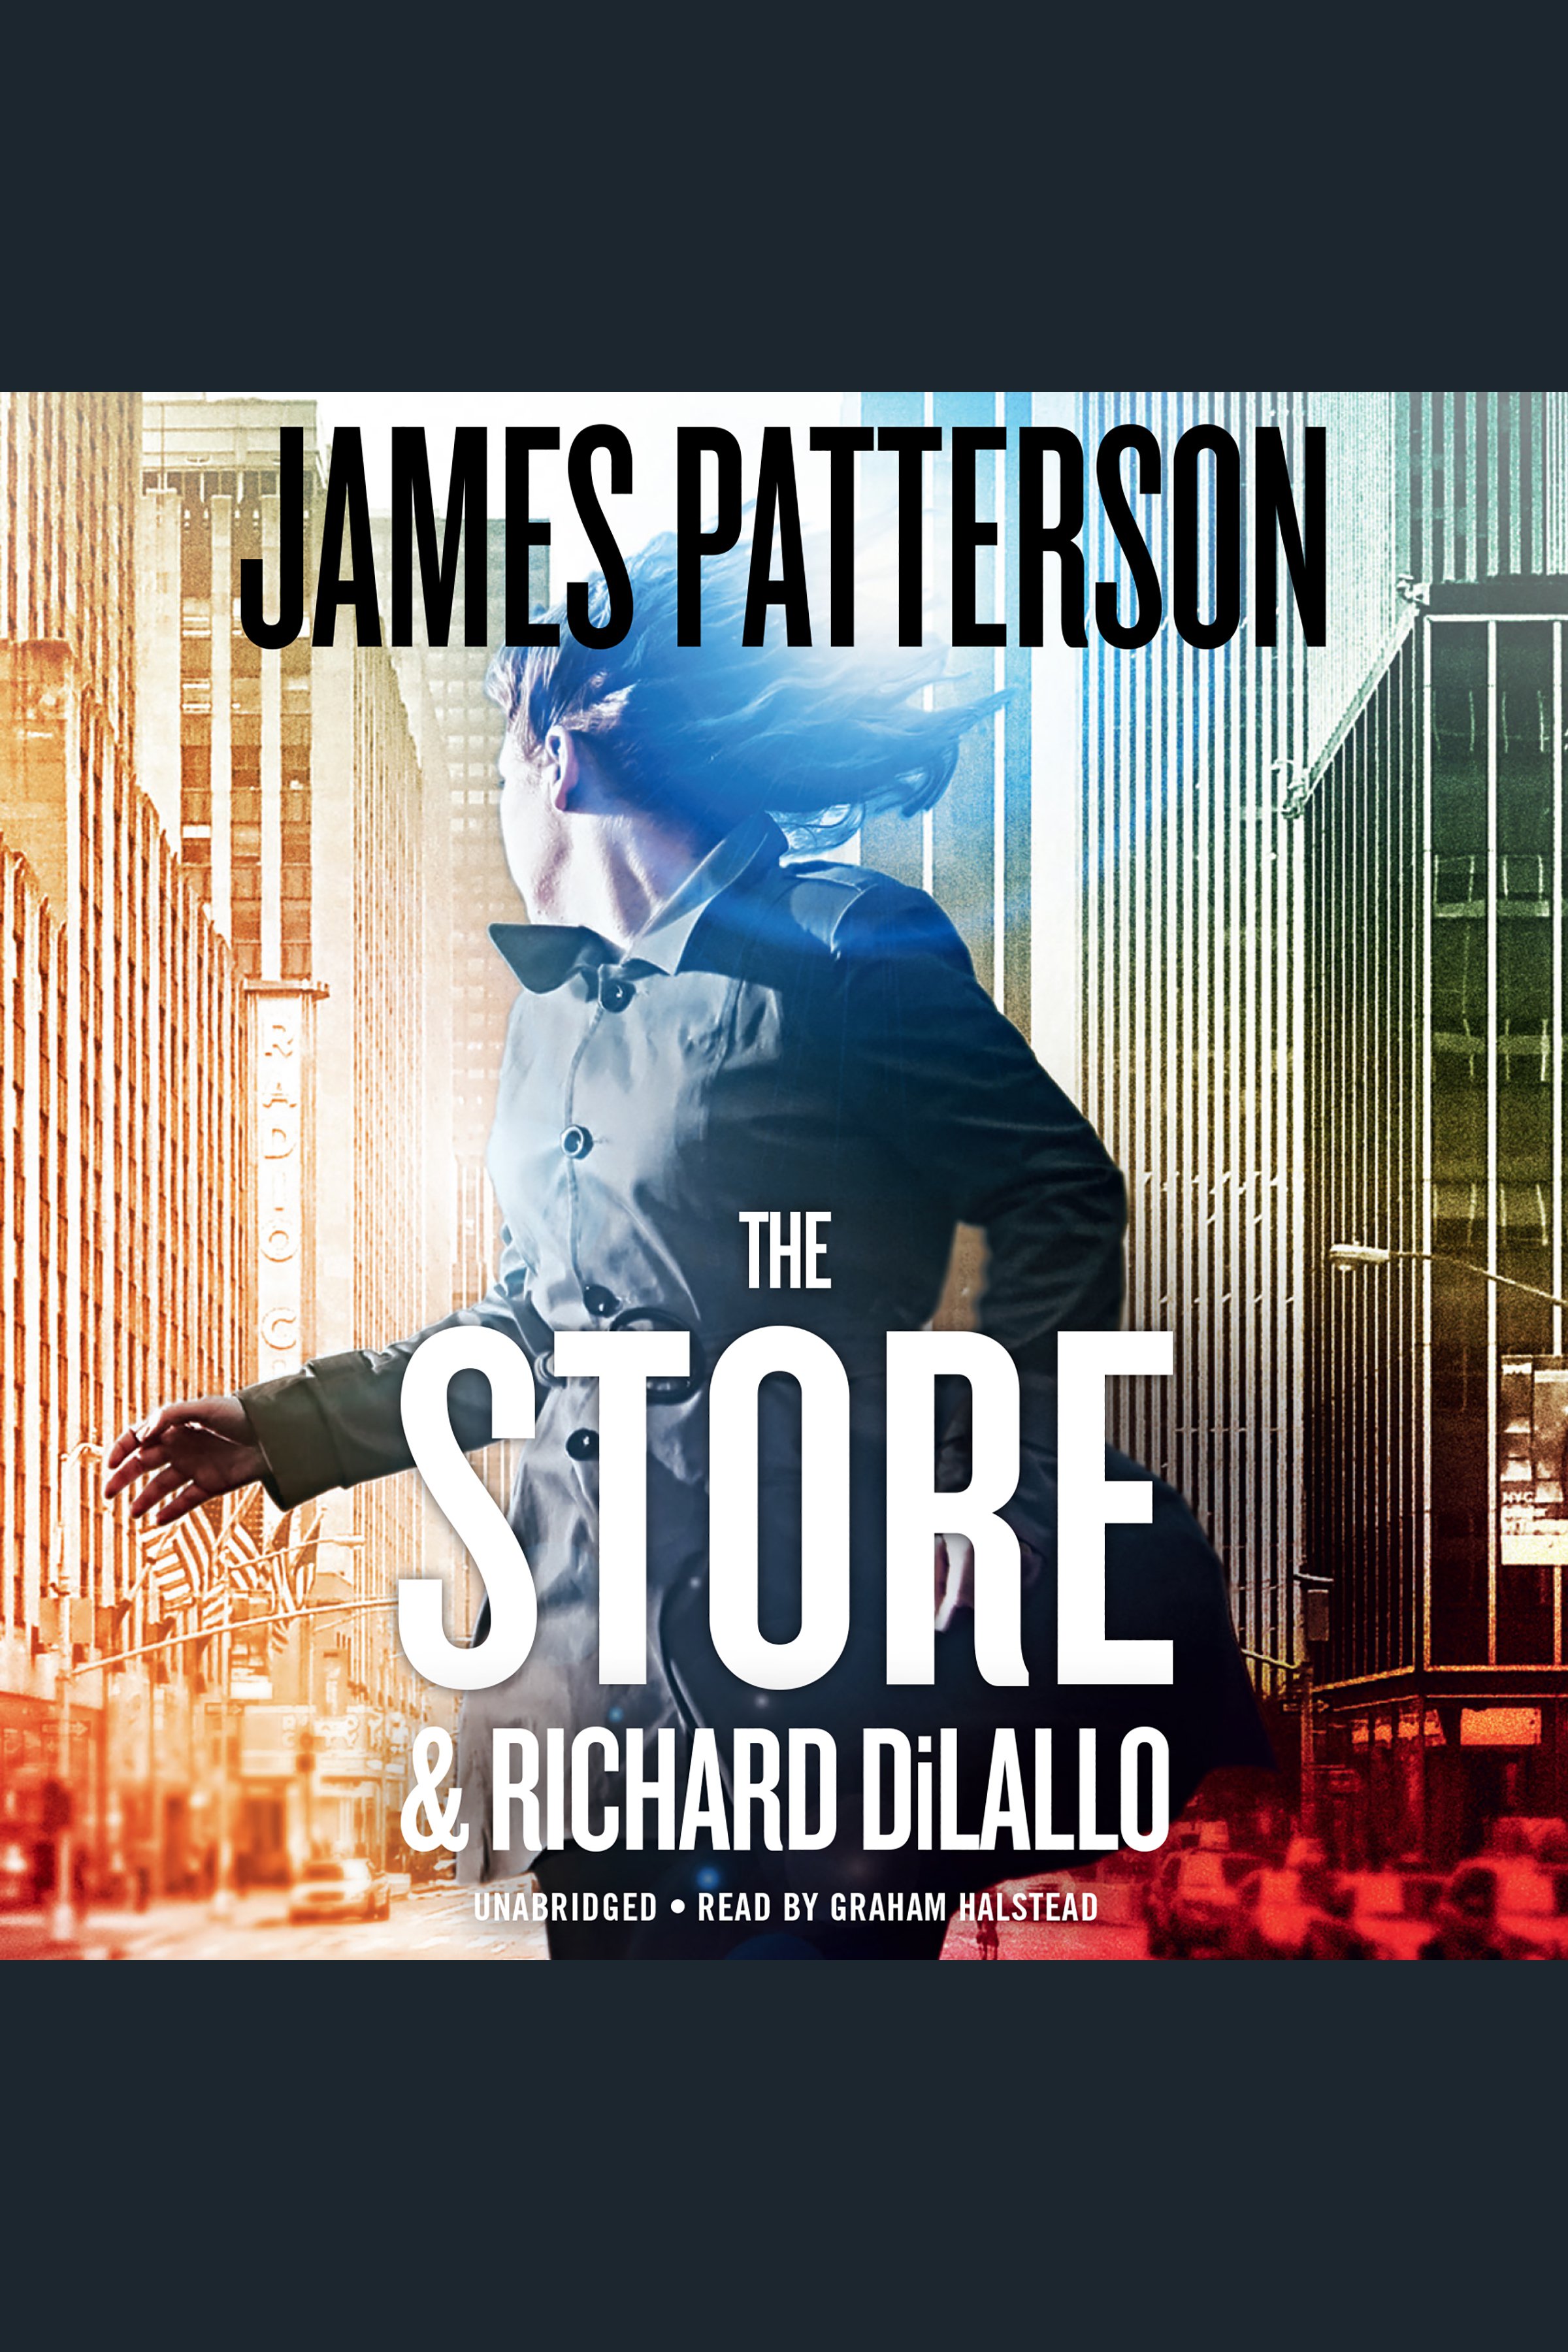 The store cover image